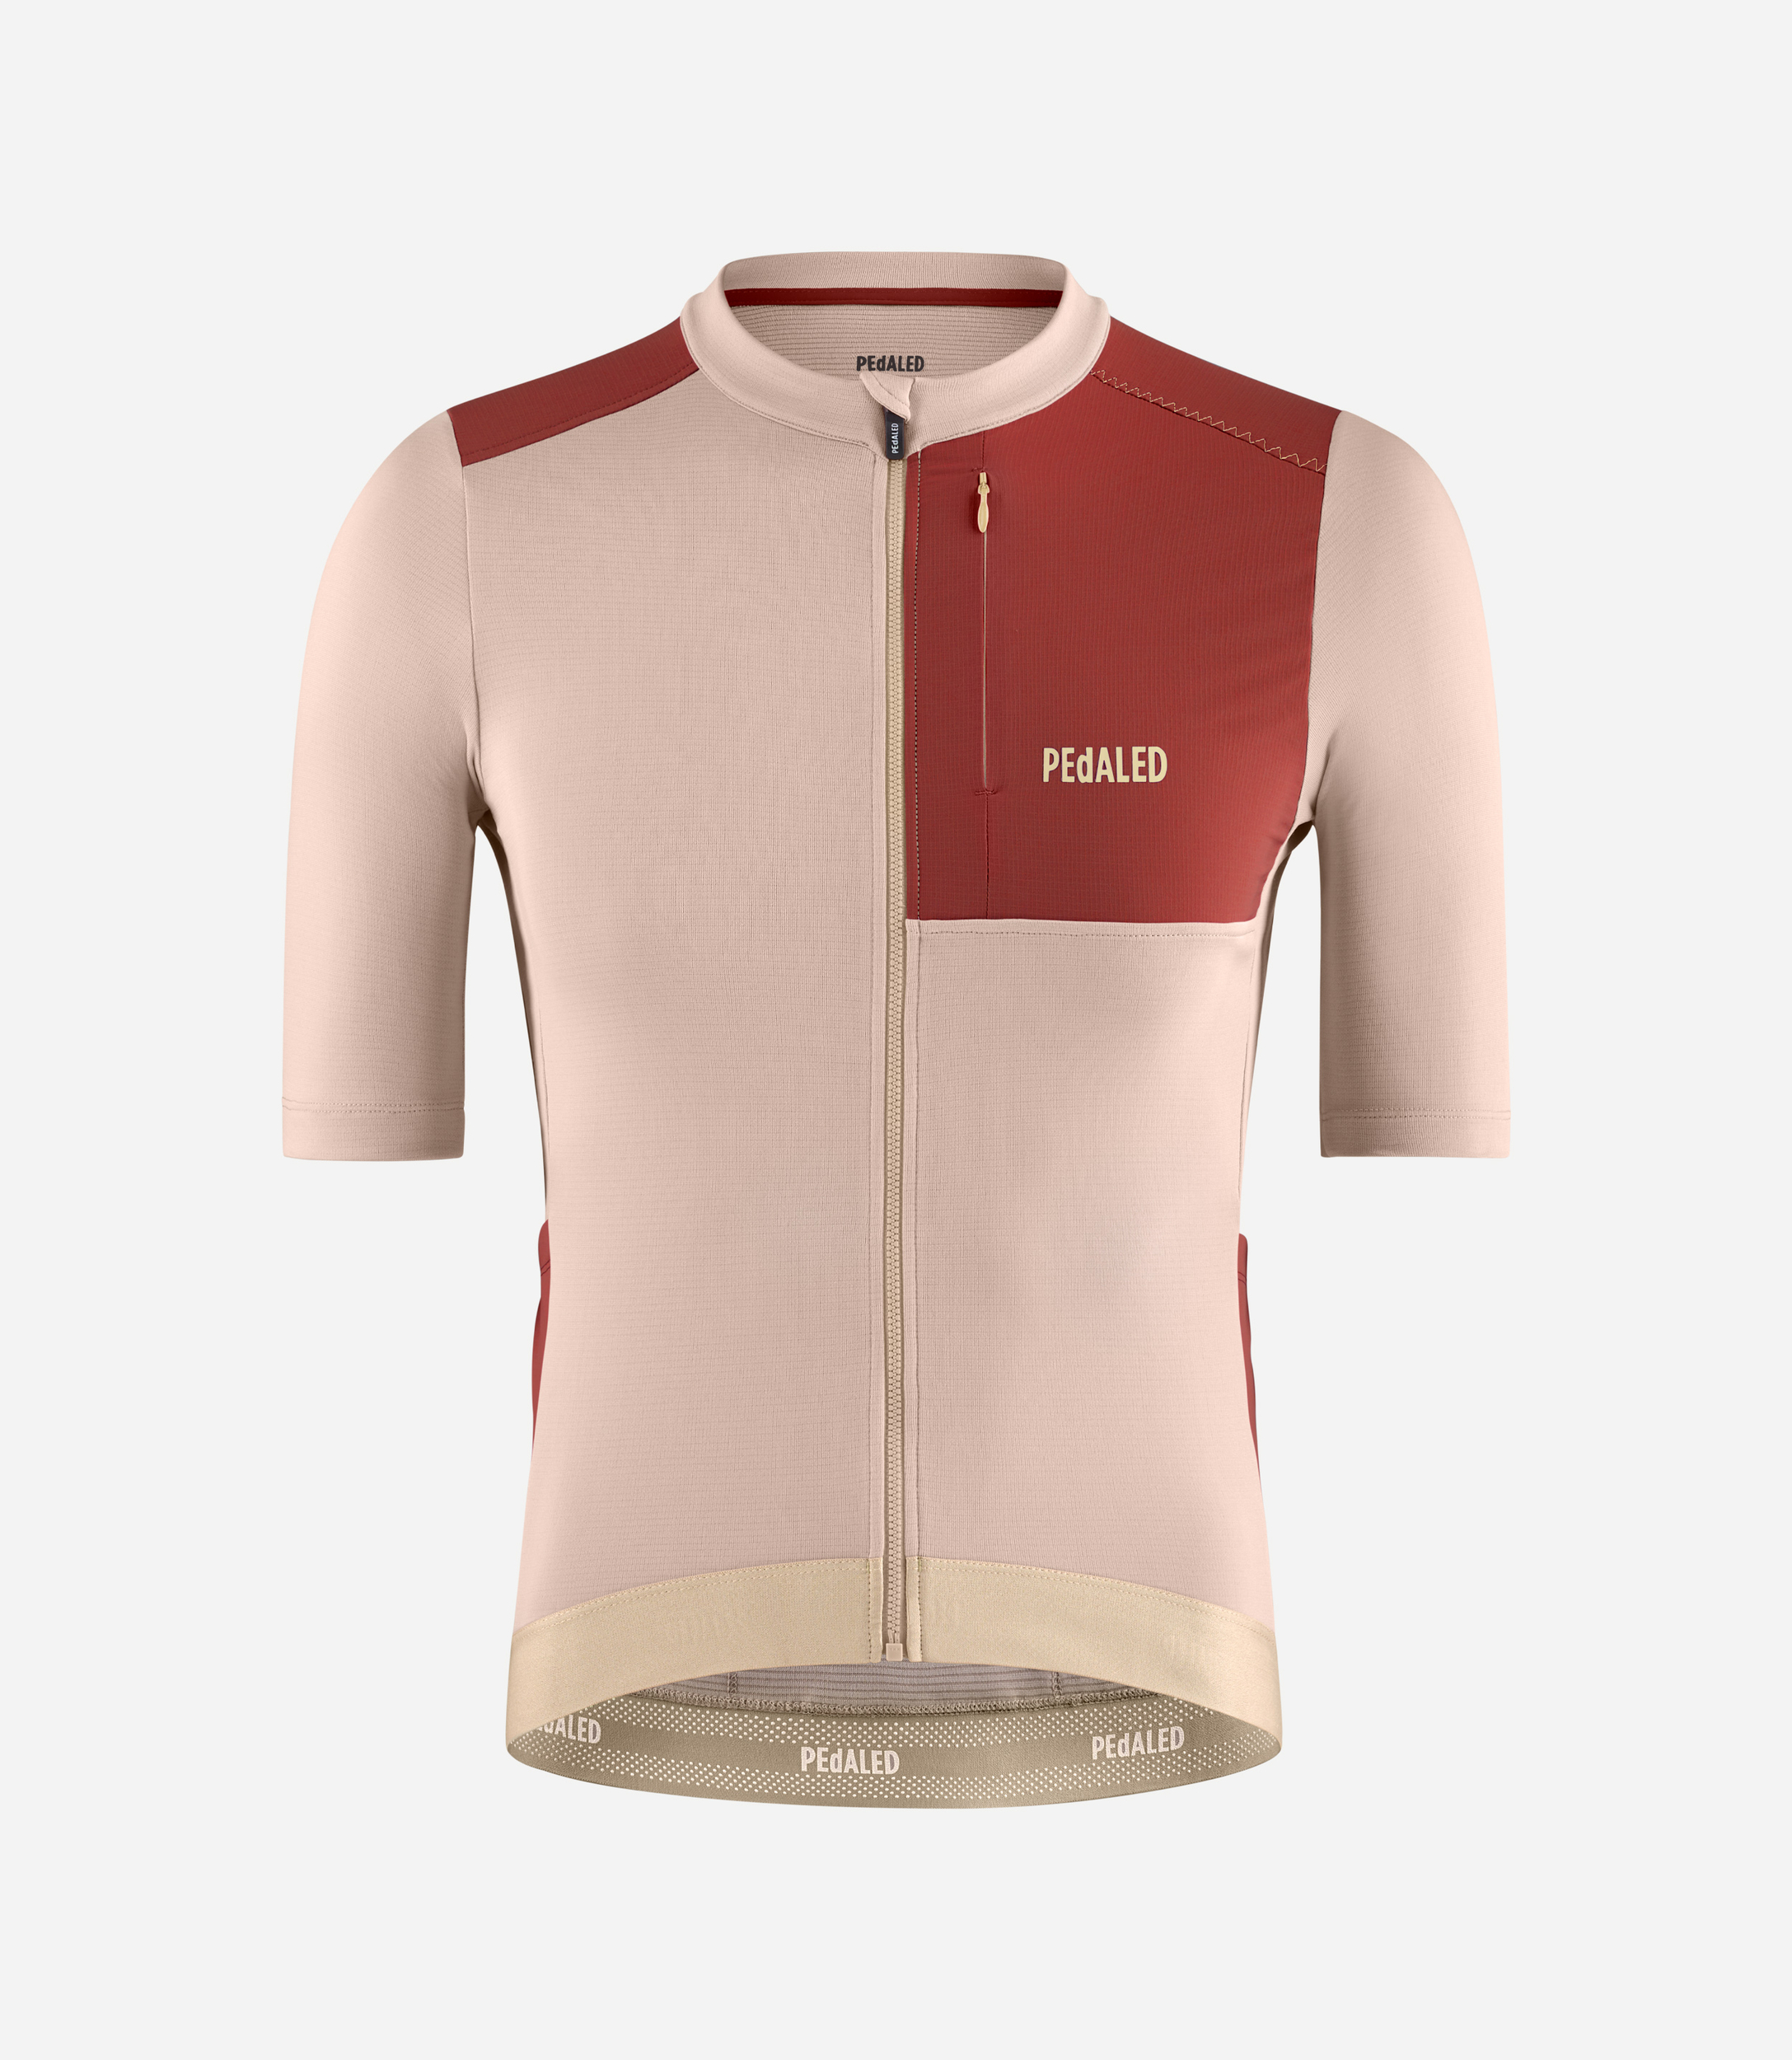 MAILLOT PEDALED MERINOS BEIGE